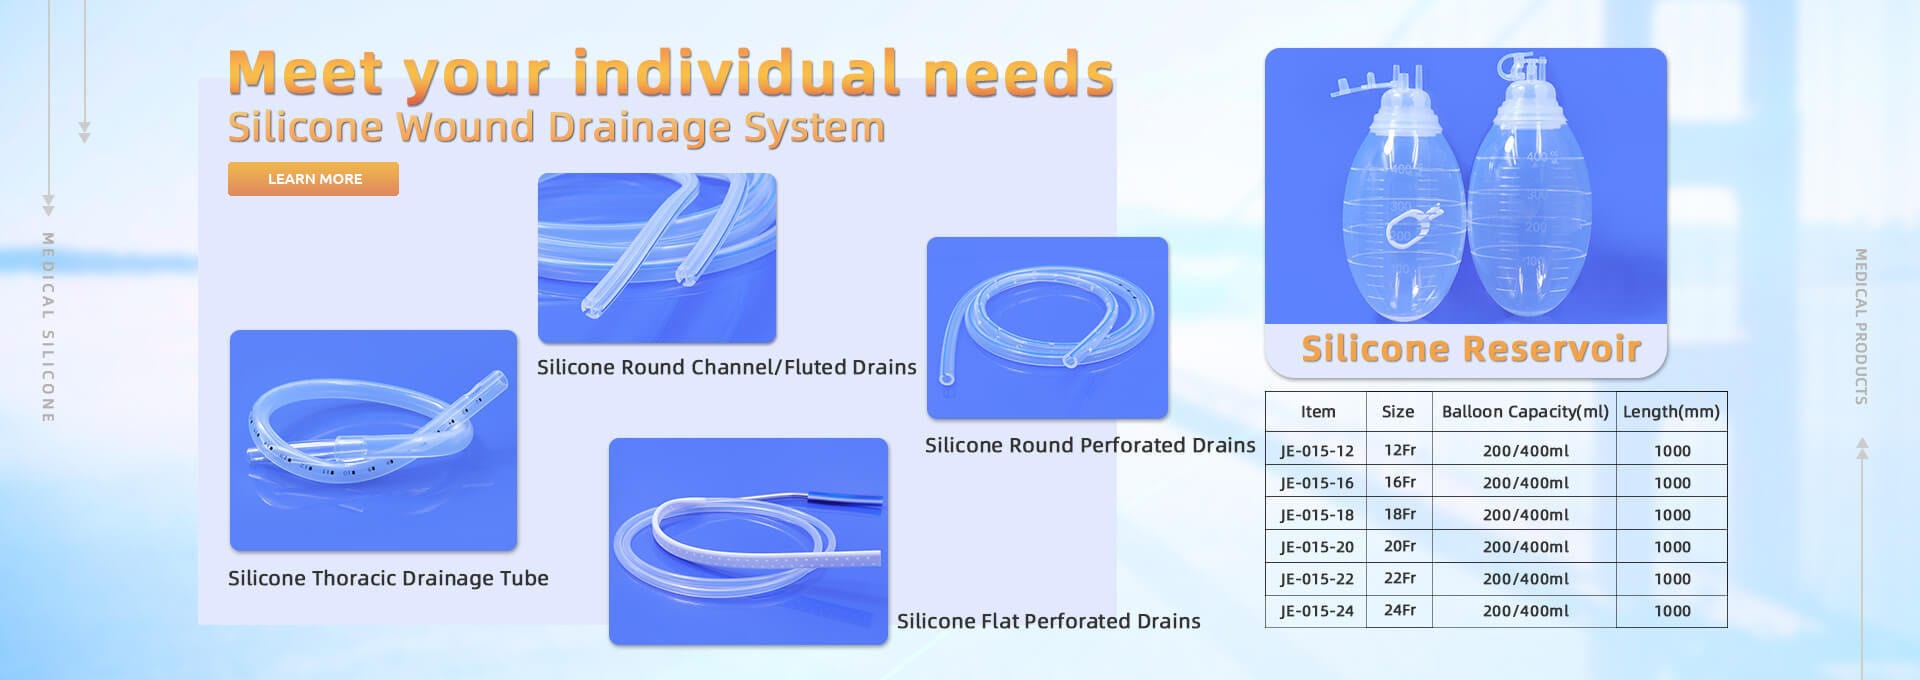 Silicone wound drainage system